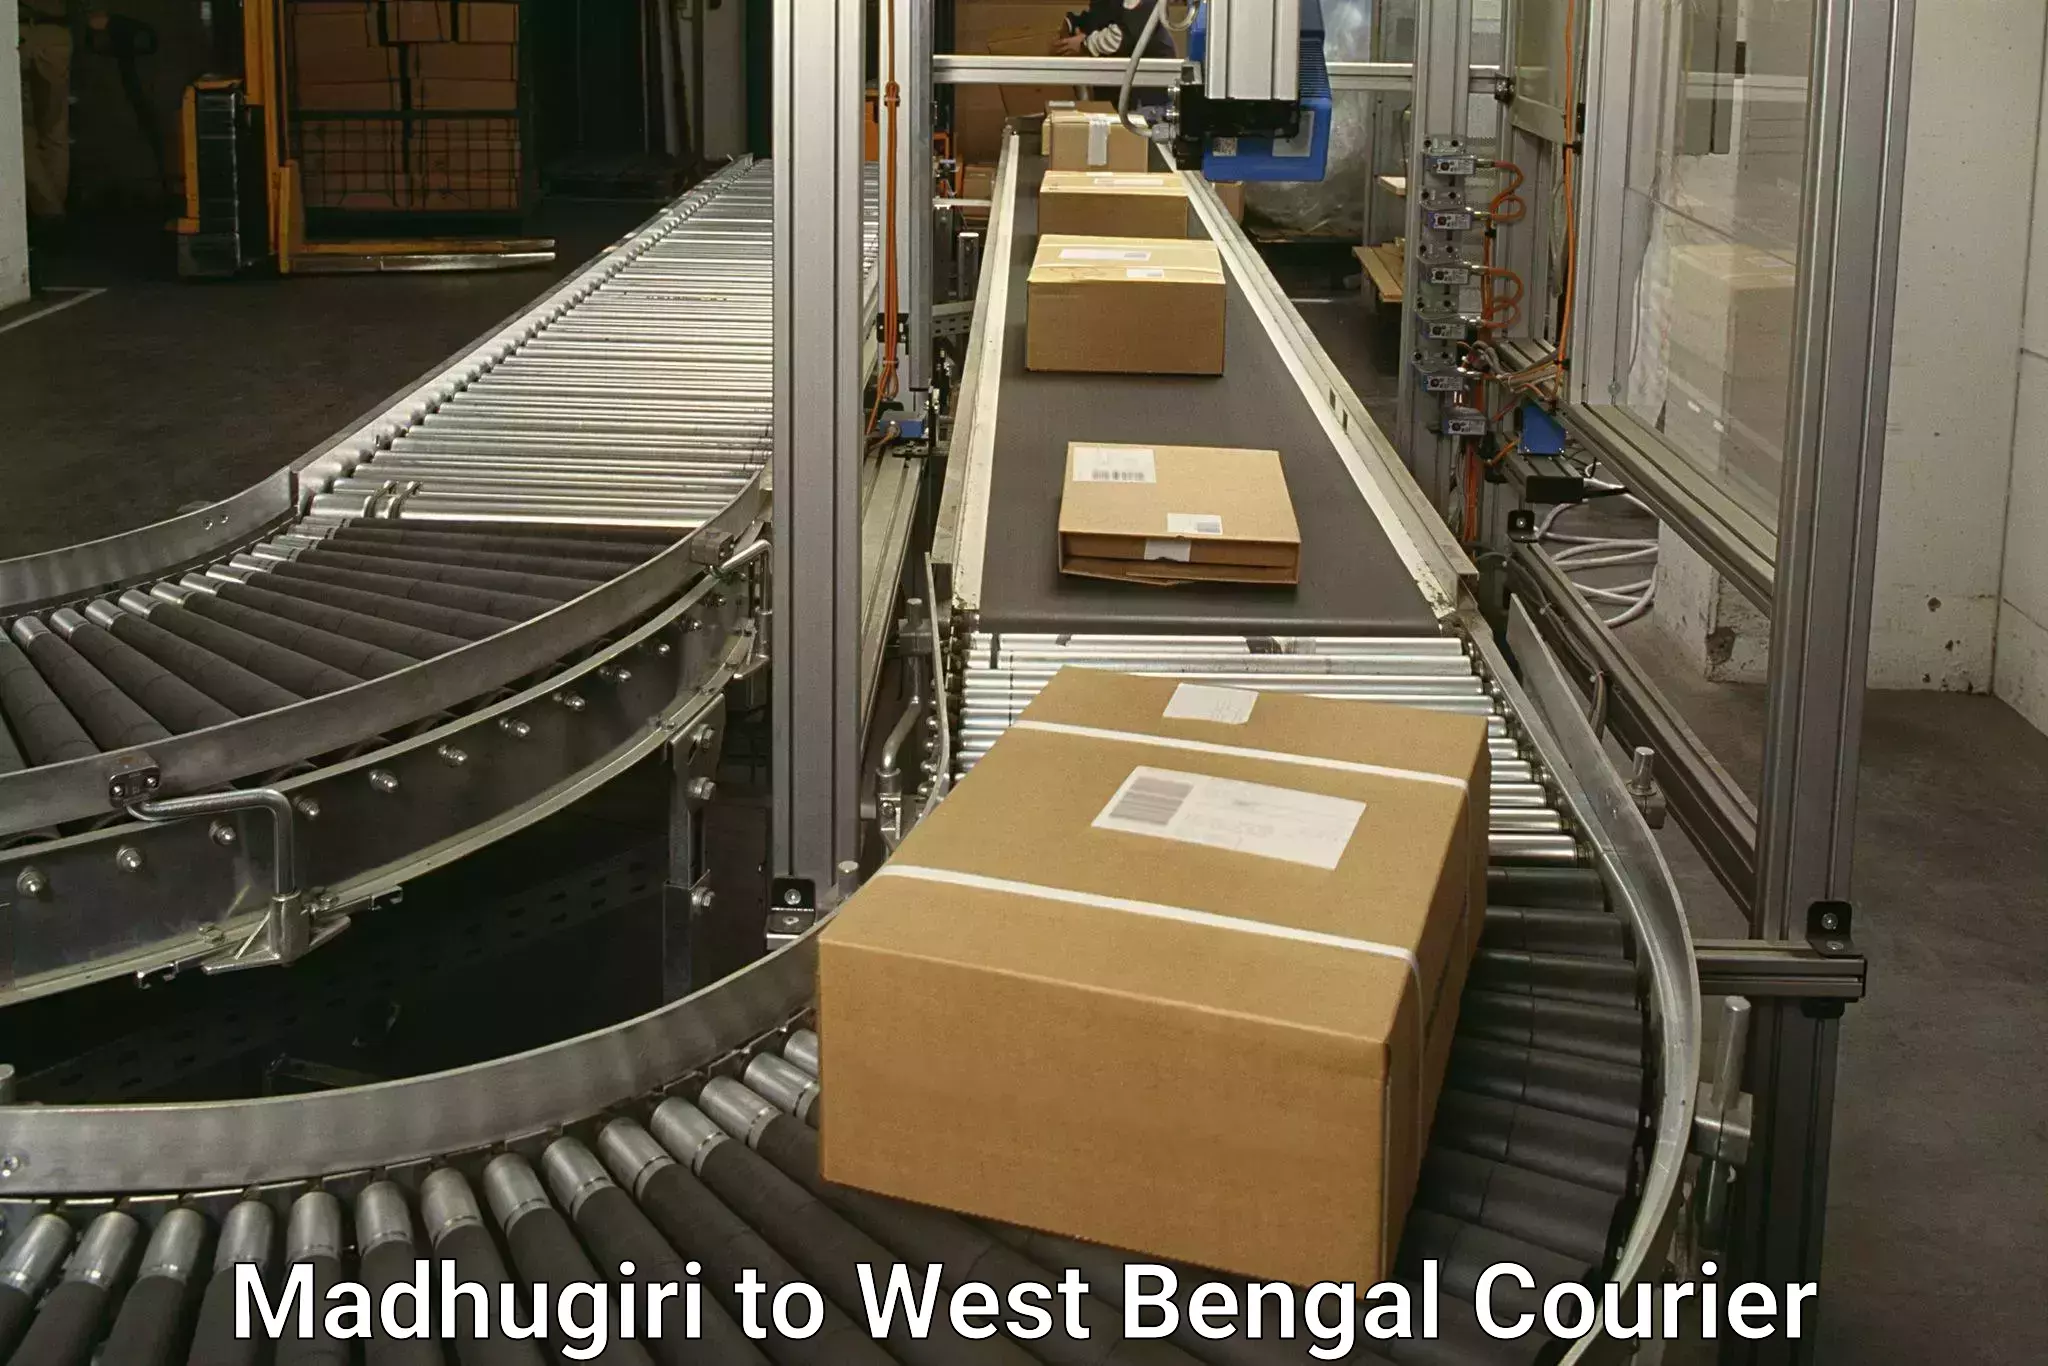 Courier service comparison in Madhugiri to Nabadwip